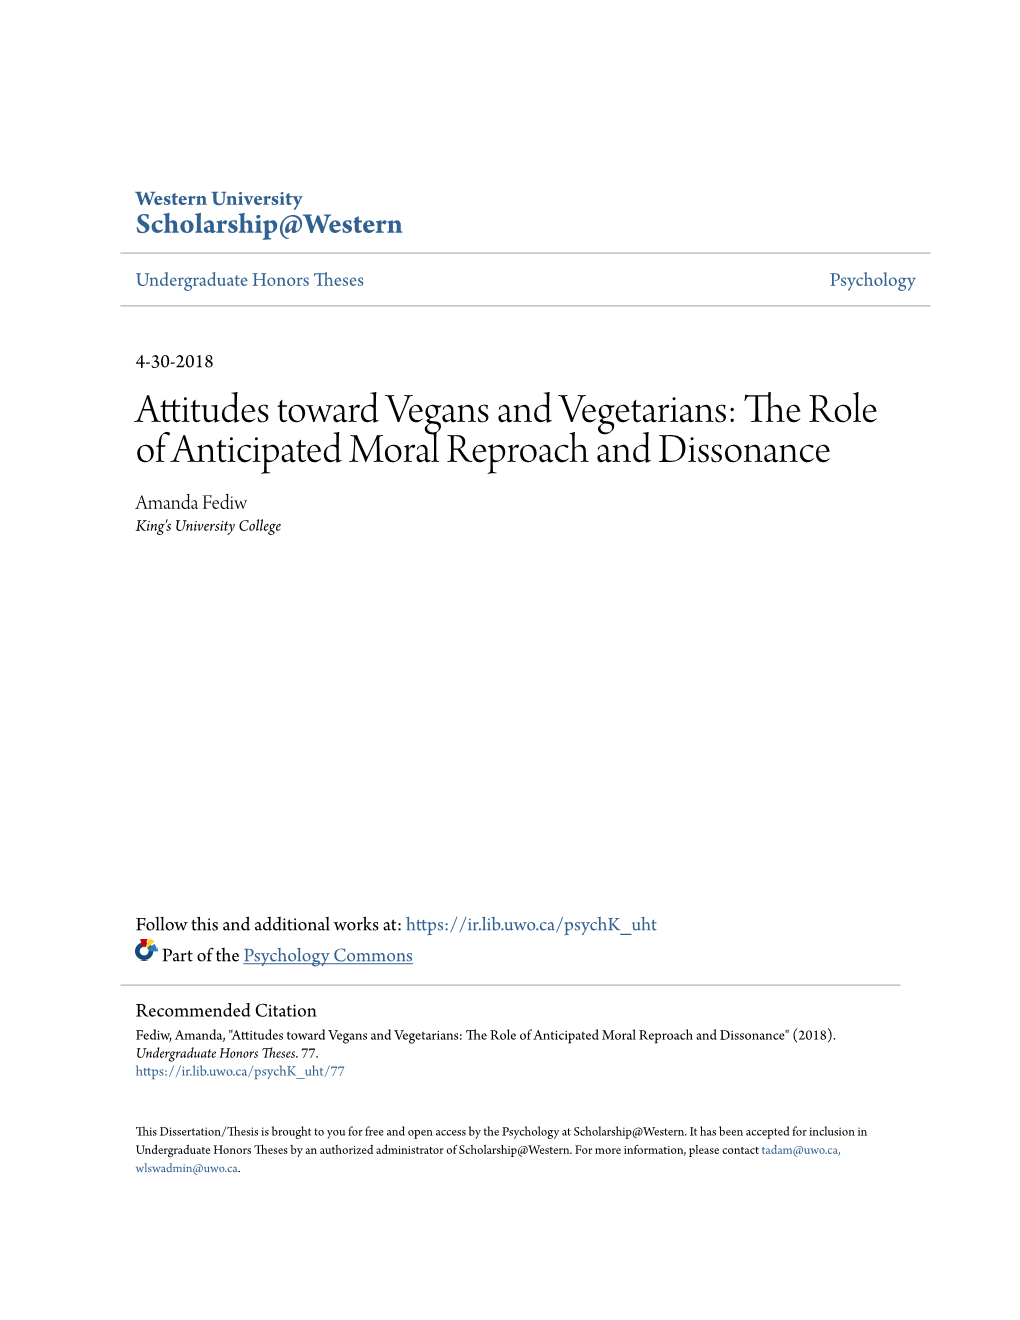 Attitudes Toward Vegans and Vegetarians: the Role of Anticipated Moral Reproach and Dissonance Amanda Fediw King's University College